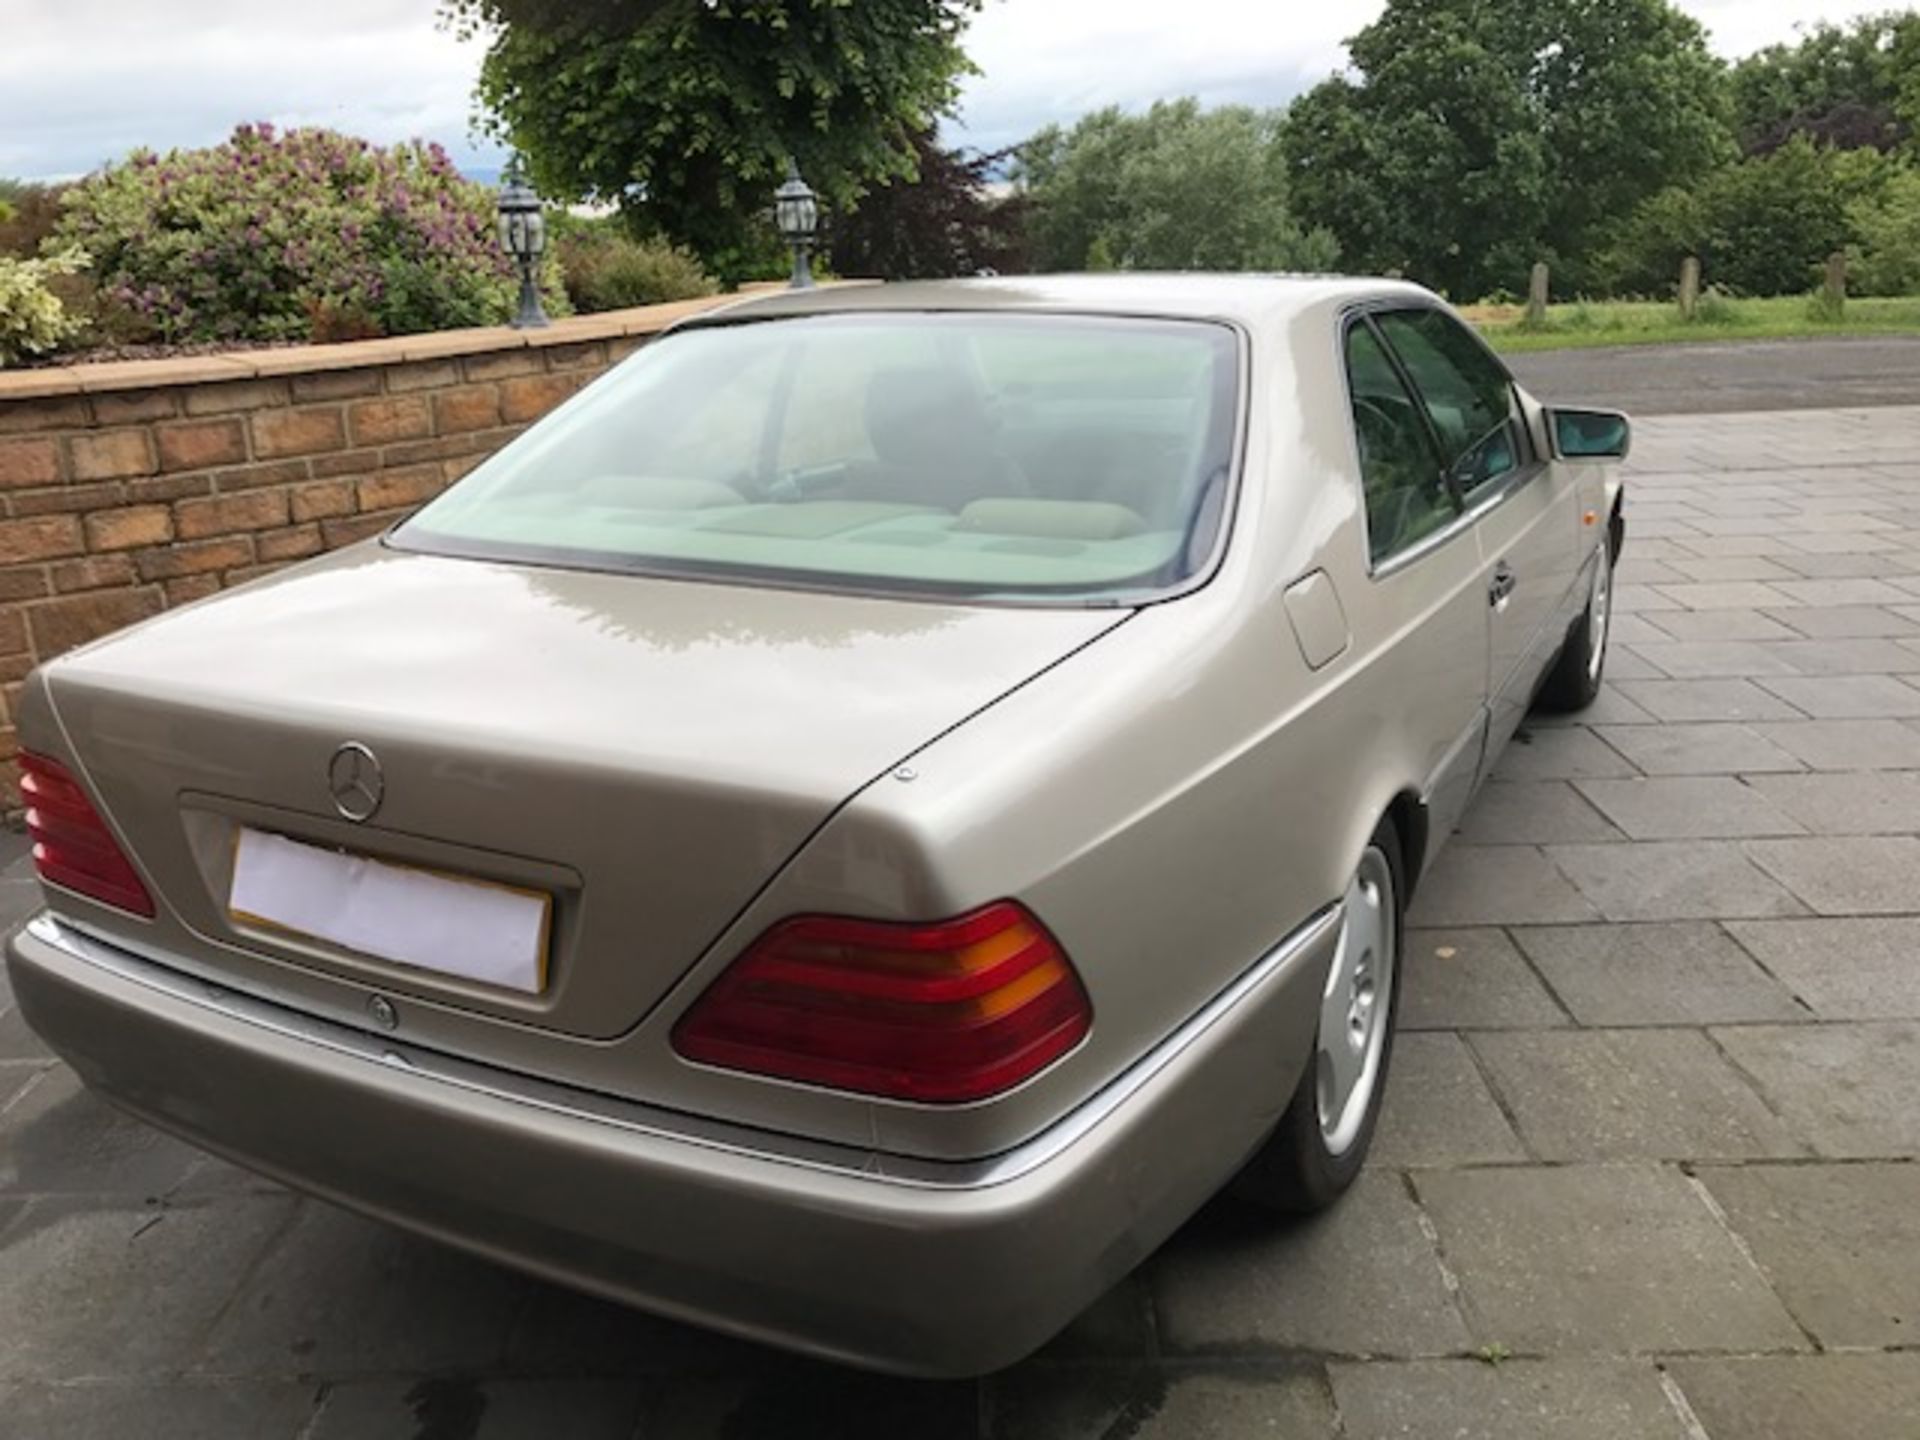 1995 Mercedes 500 Coupe (Auto) - Image 8 of 14